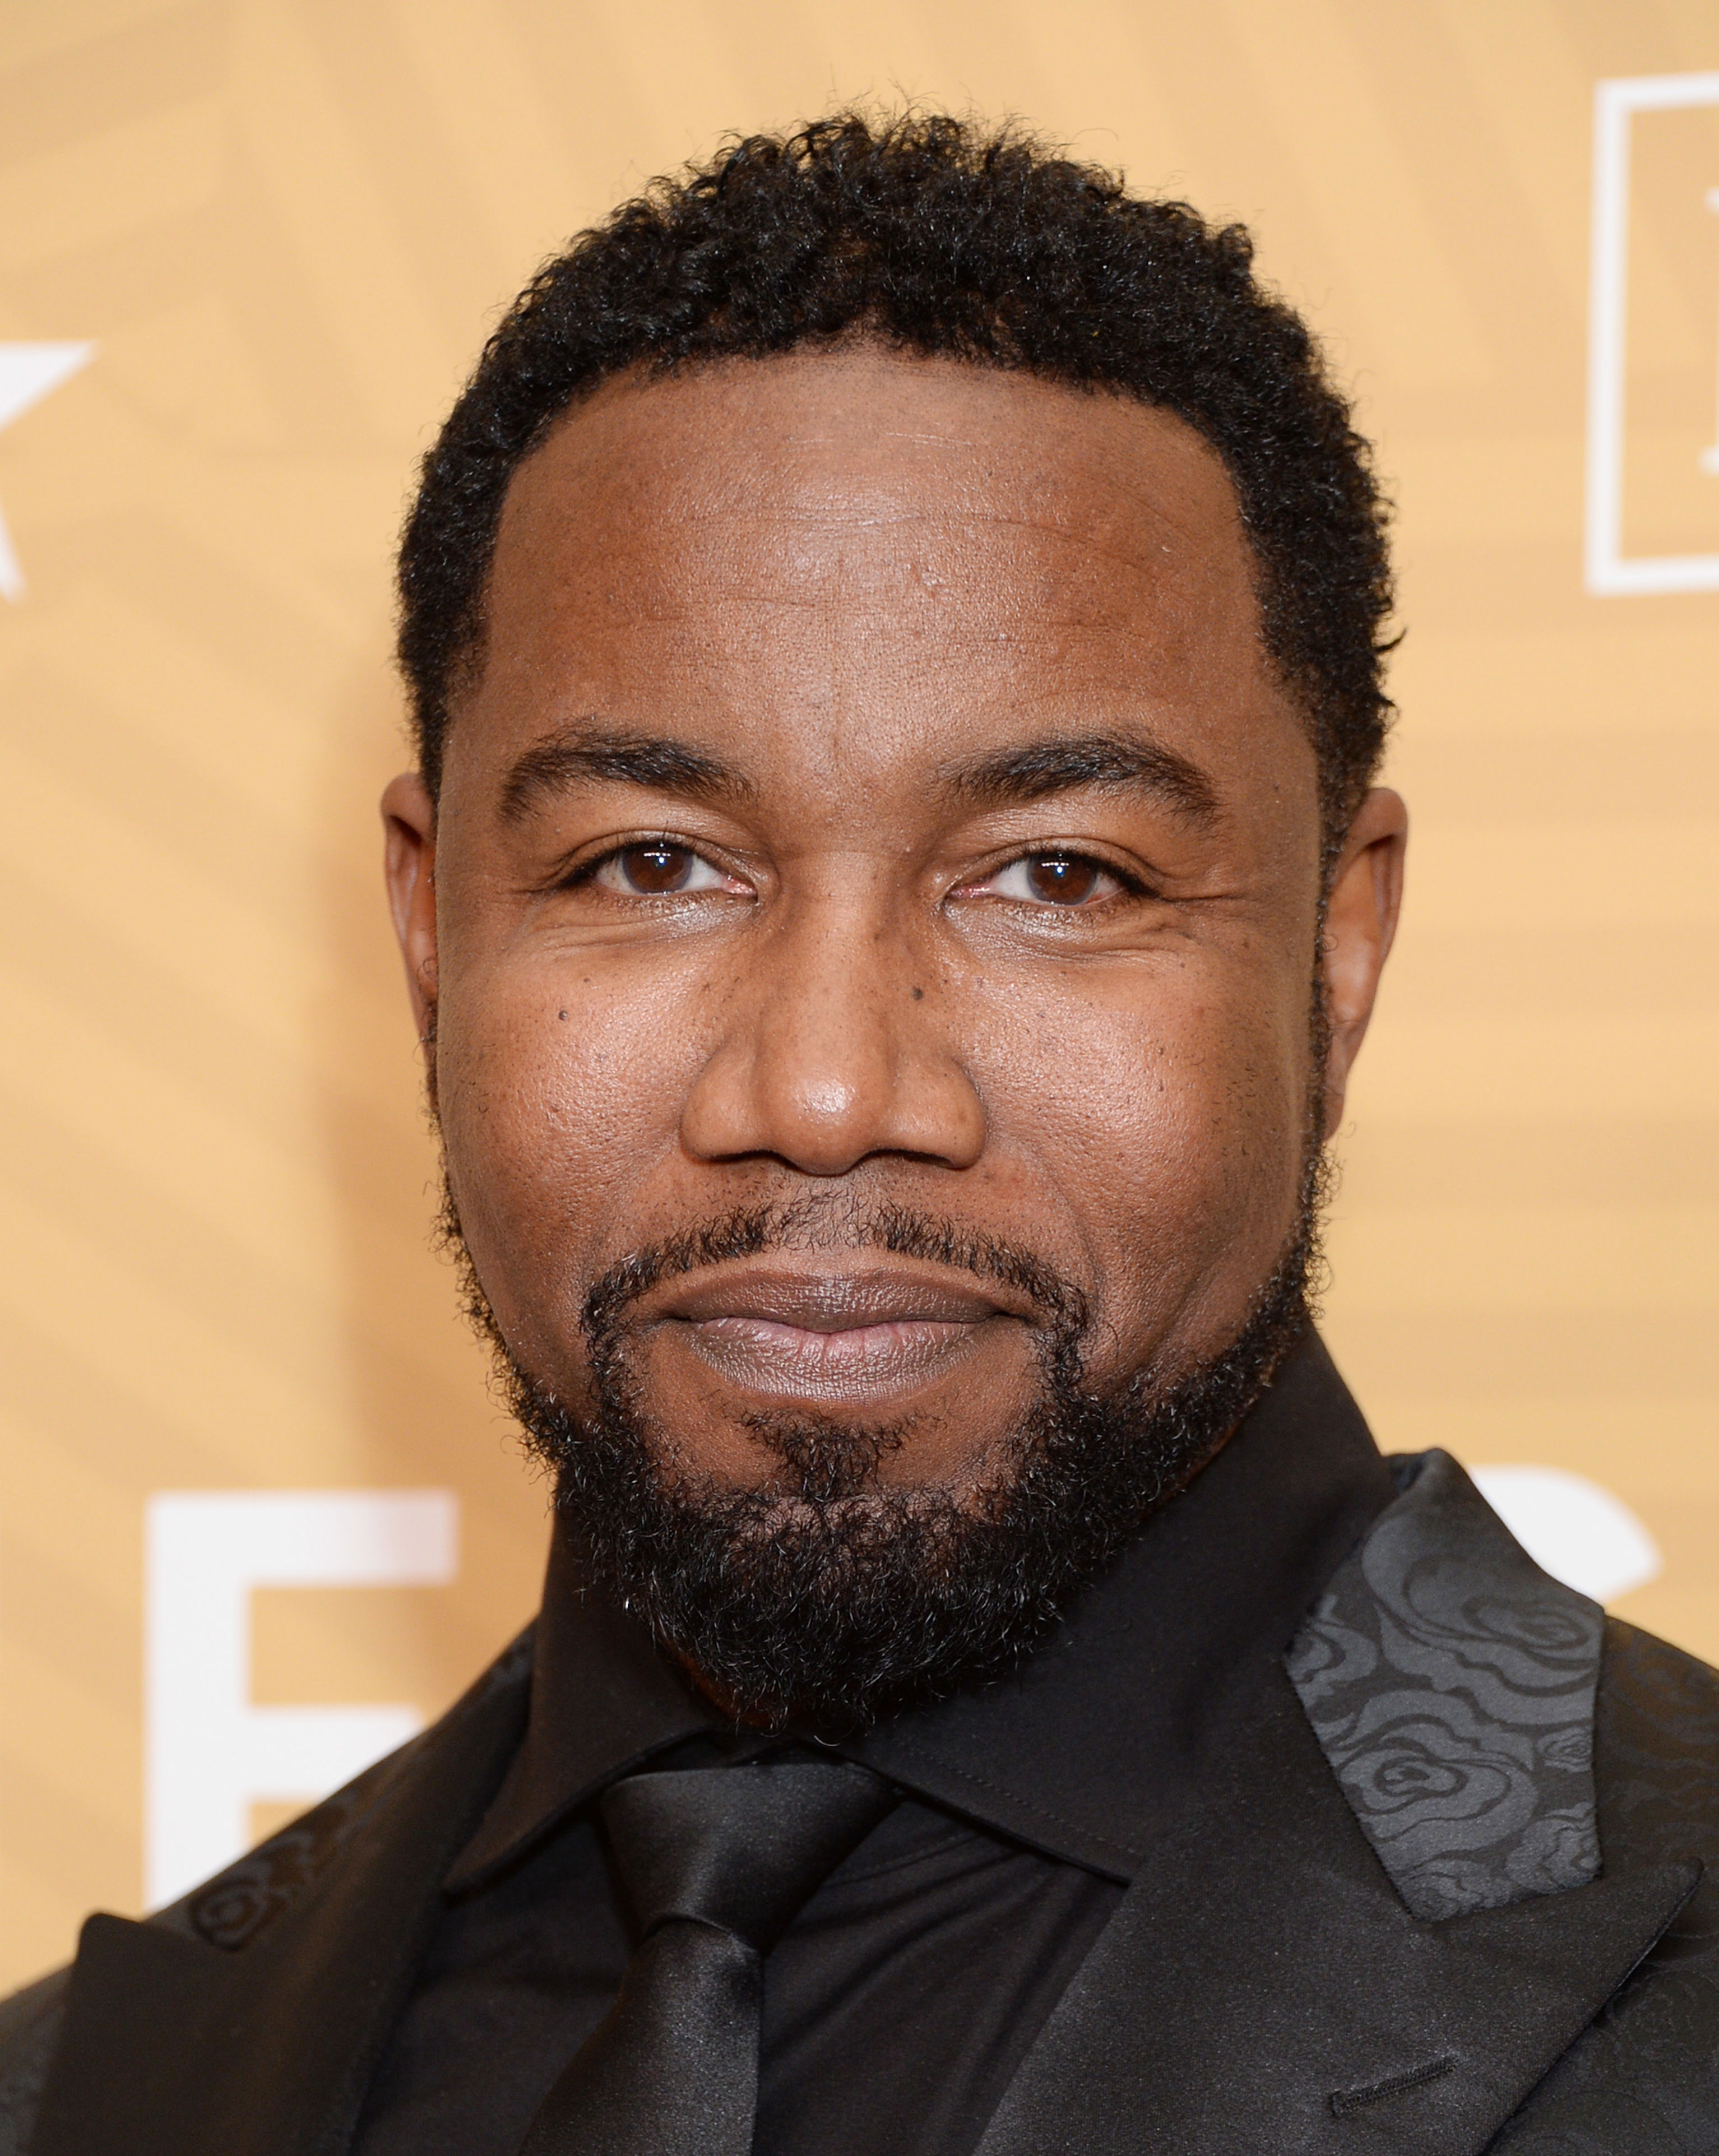 <p>"Black Dynamite" and "Spawn" actor Michael Jai White revealed in an interview with <a href="https://www.youtube.com/watch?v=Wl6pudr-Nio&feature=youtu.be">VladTV</a> that hit the internet on Aug. 1, 2021, that his oldest son died from COVID-19 complications at 38 "a few months ago," explaining (as reported by <a href="https://people.com/tv/michael-jai-white-says-oldest-son-died-from-covid/">People</a> magazine), "He was in the hospital for a while so it wasn't immediate." Michael's son -- a father of six -- had also been dealing with substance abuse issues that further "compromised" his health amid his battle with the coronavirus. "Ultimately, when he got sick and went to the hospital, COVID was waiting for him... That was the knockout blow," the "For Better of Worse" and "Arrow" actor said, adding that his son, whose name he didn't share, had not been vaccinated.</p>